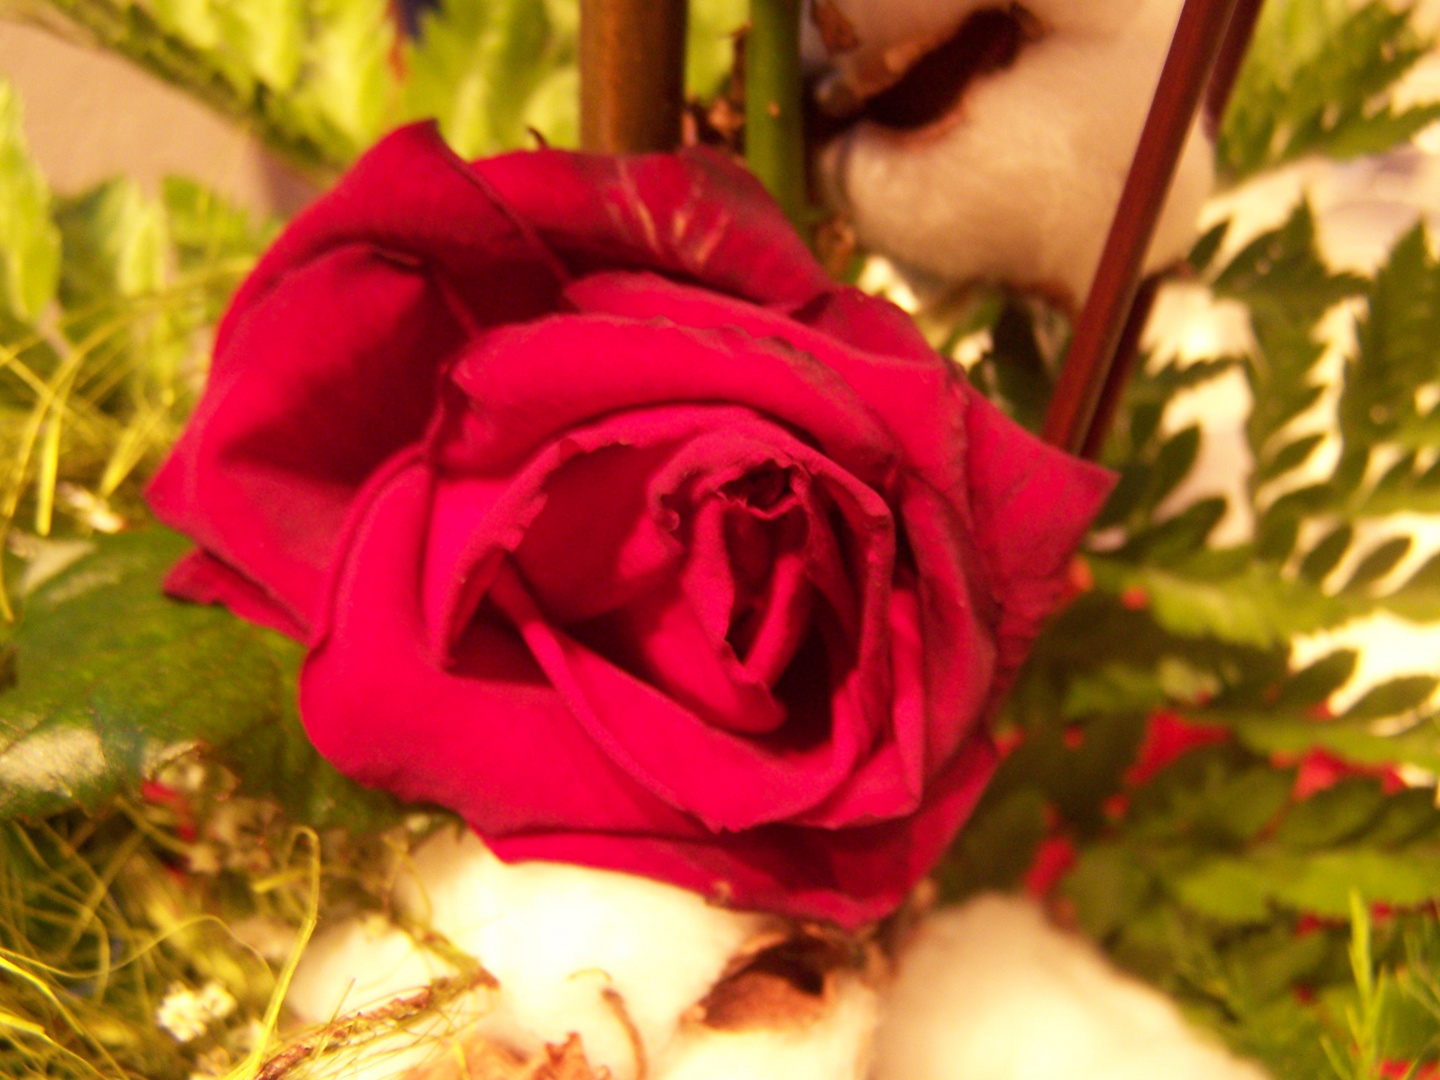 The Wild Red Rose